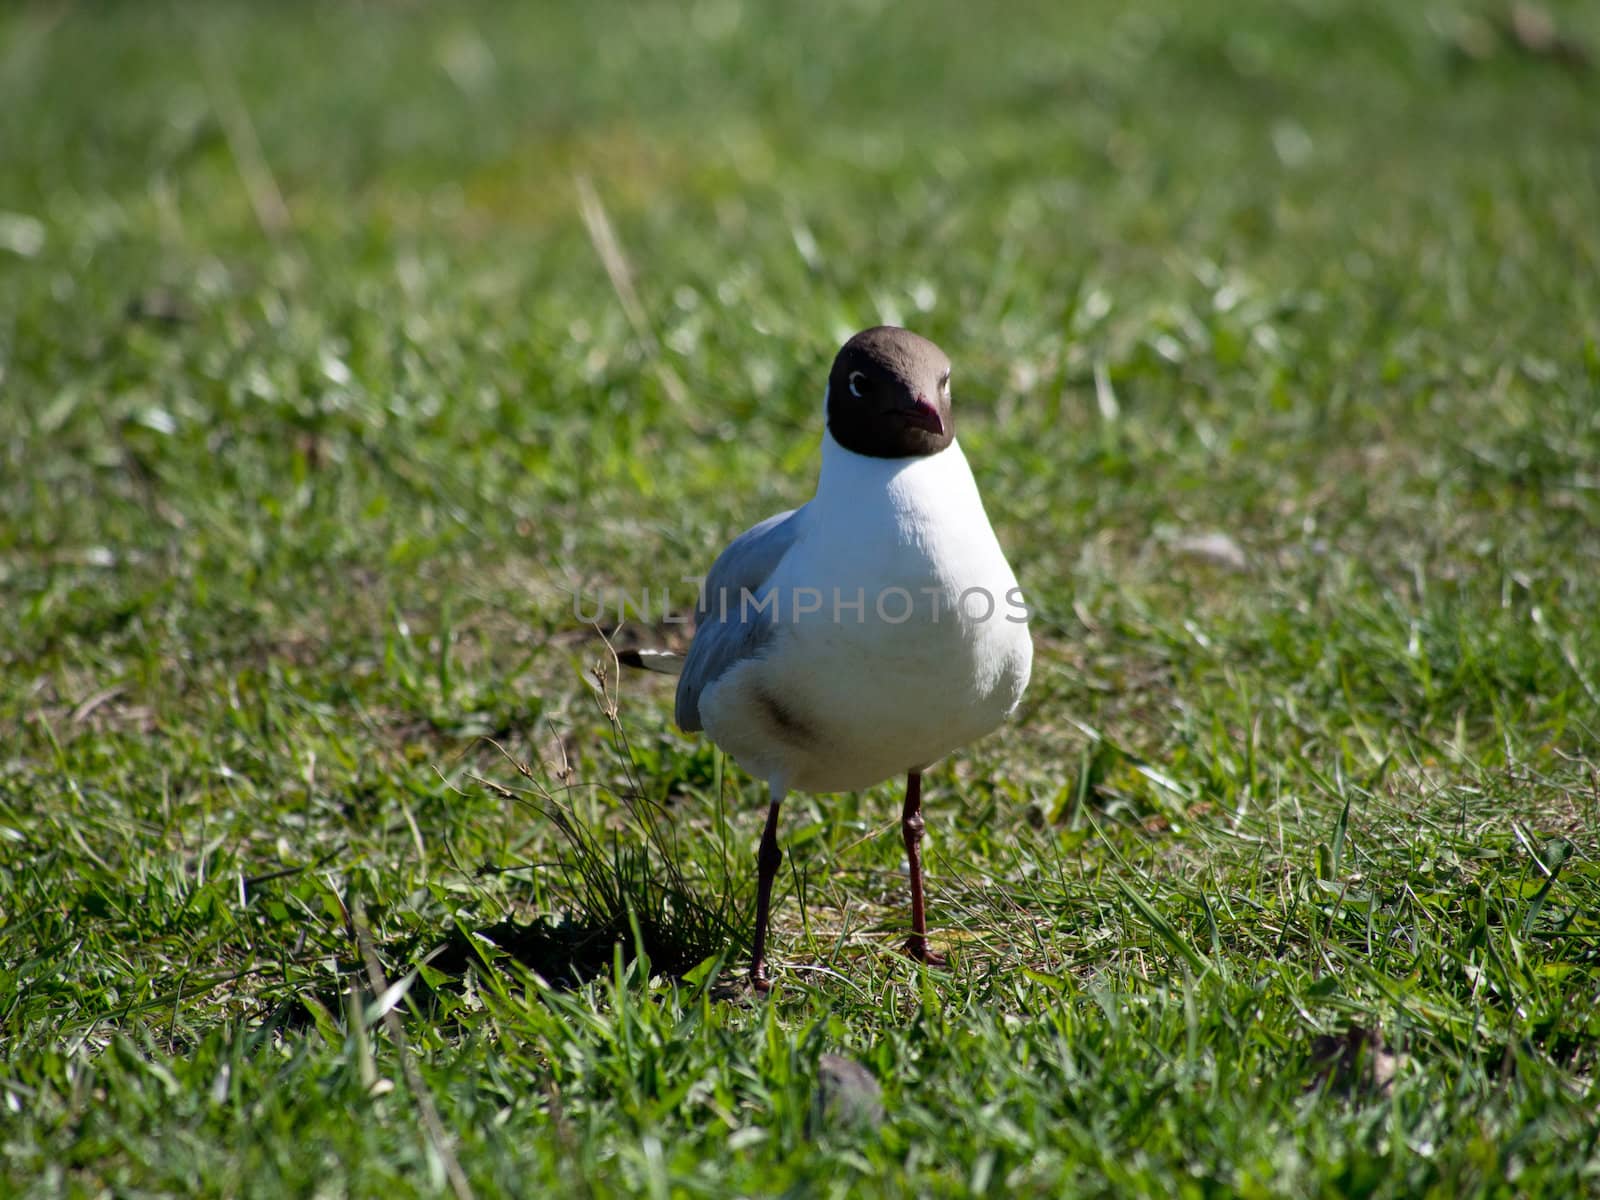 Seagull on the grass by Enskanto